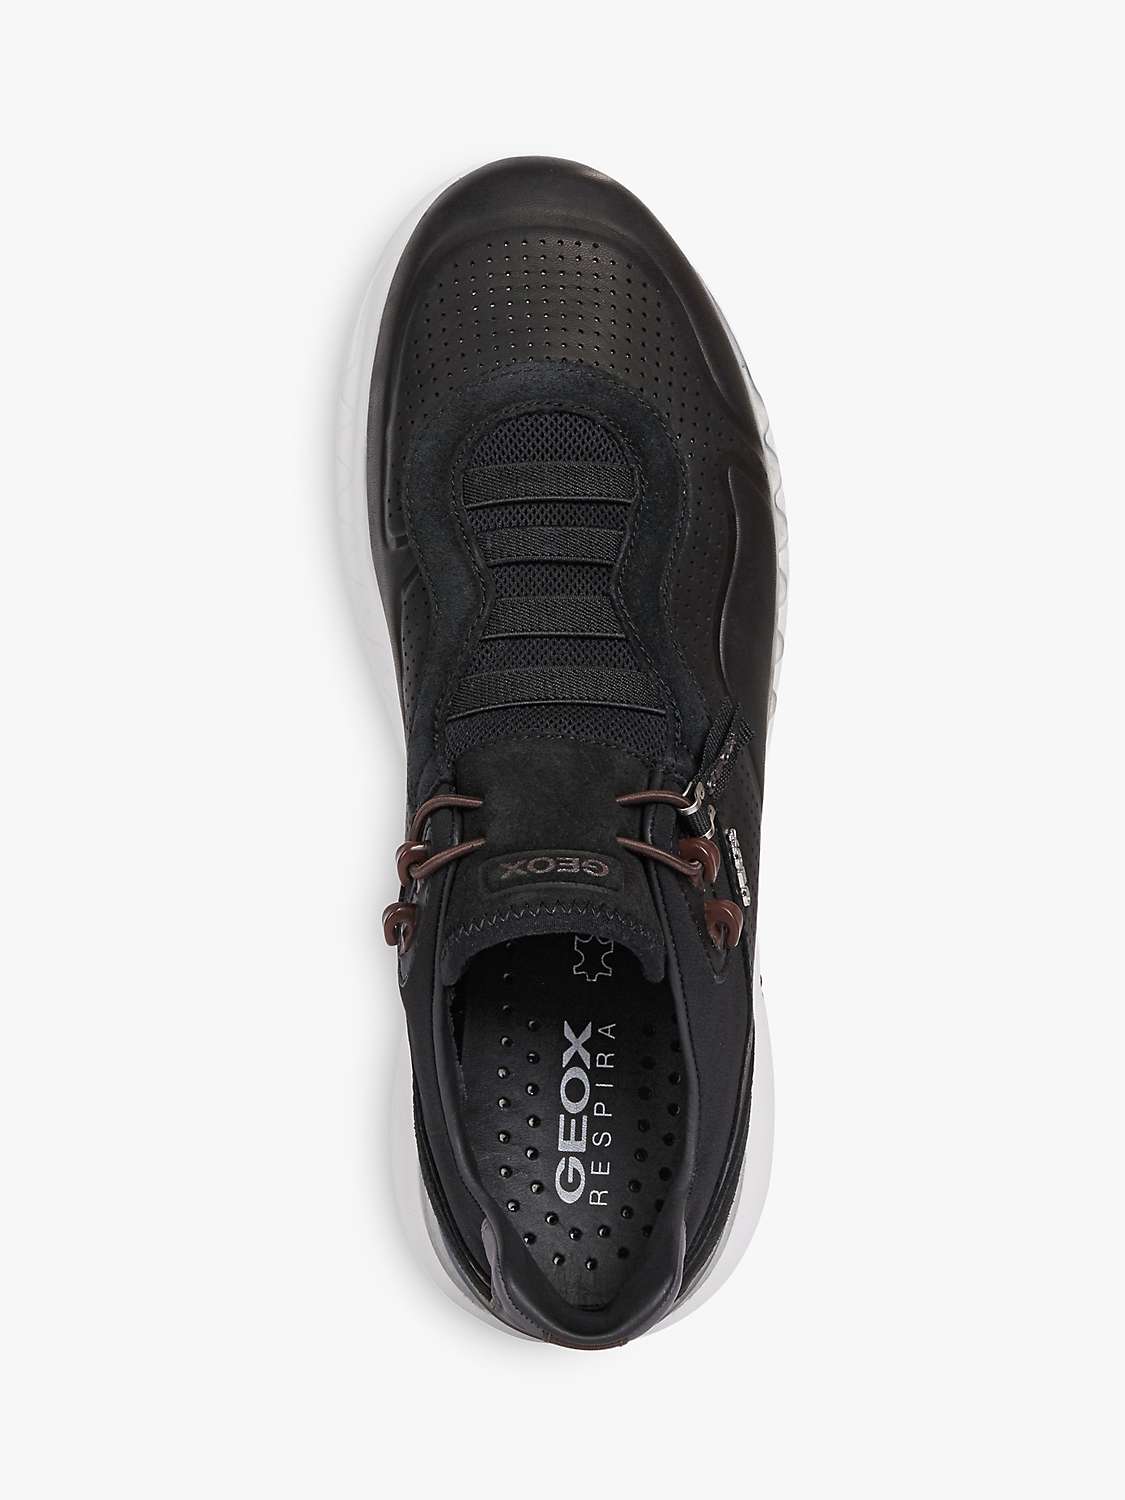 Buy Geox Levita Wide Fit Leather Trainers Online at johnlewis.com